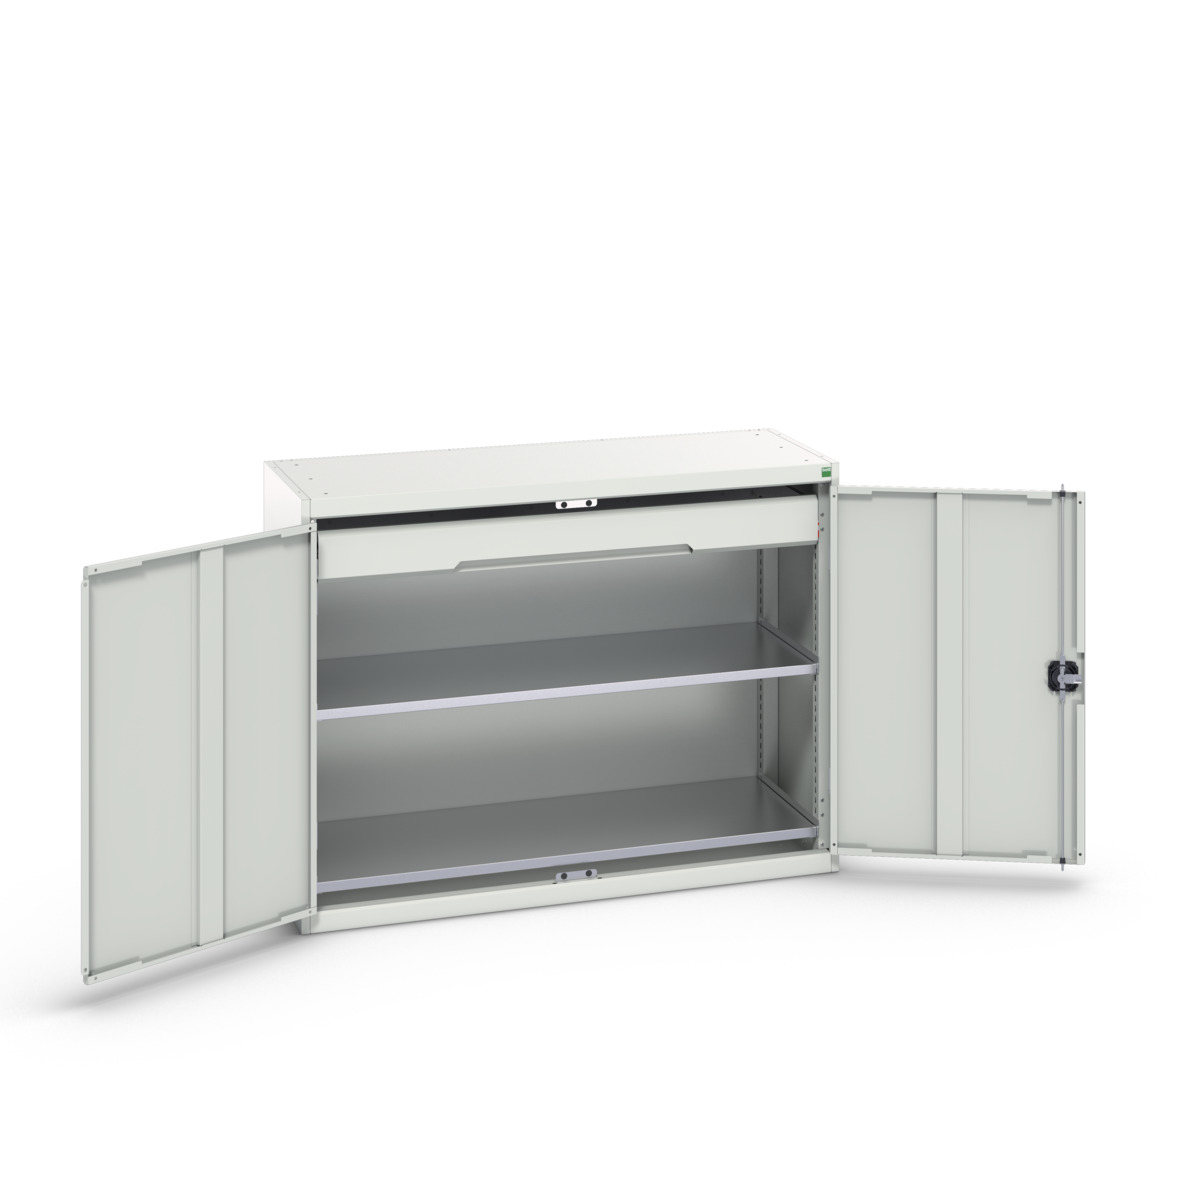 16926604.16 - verso kitted cupboard